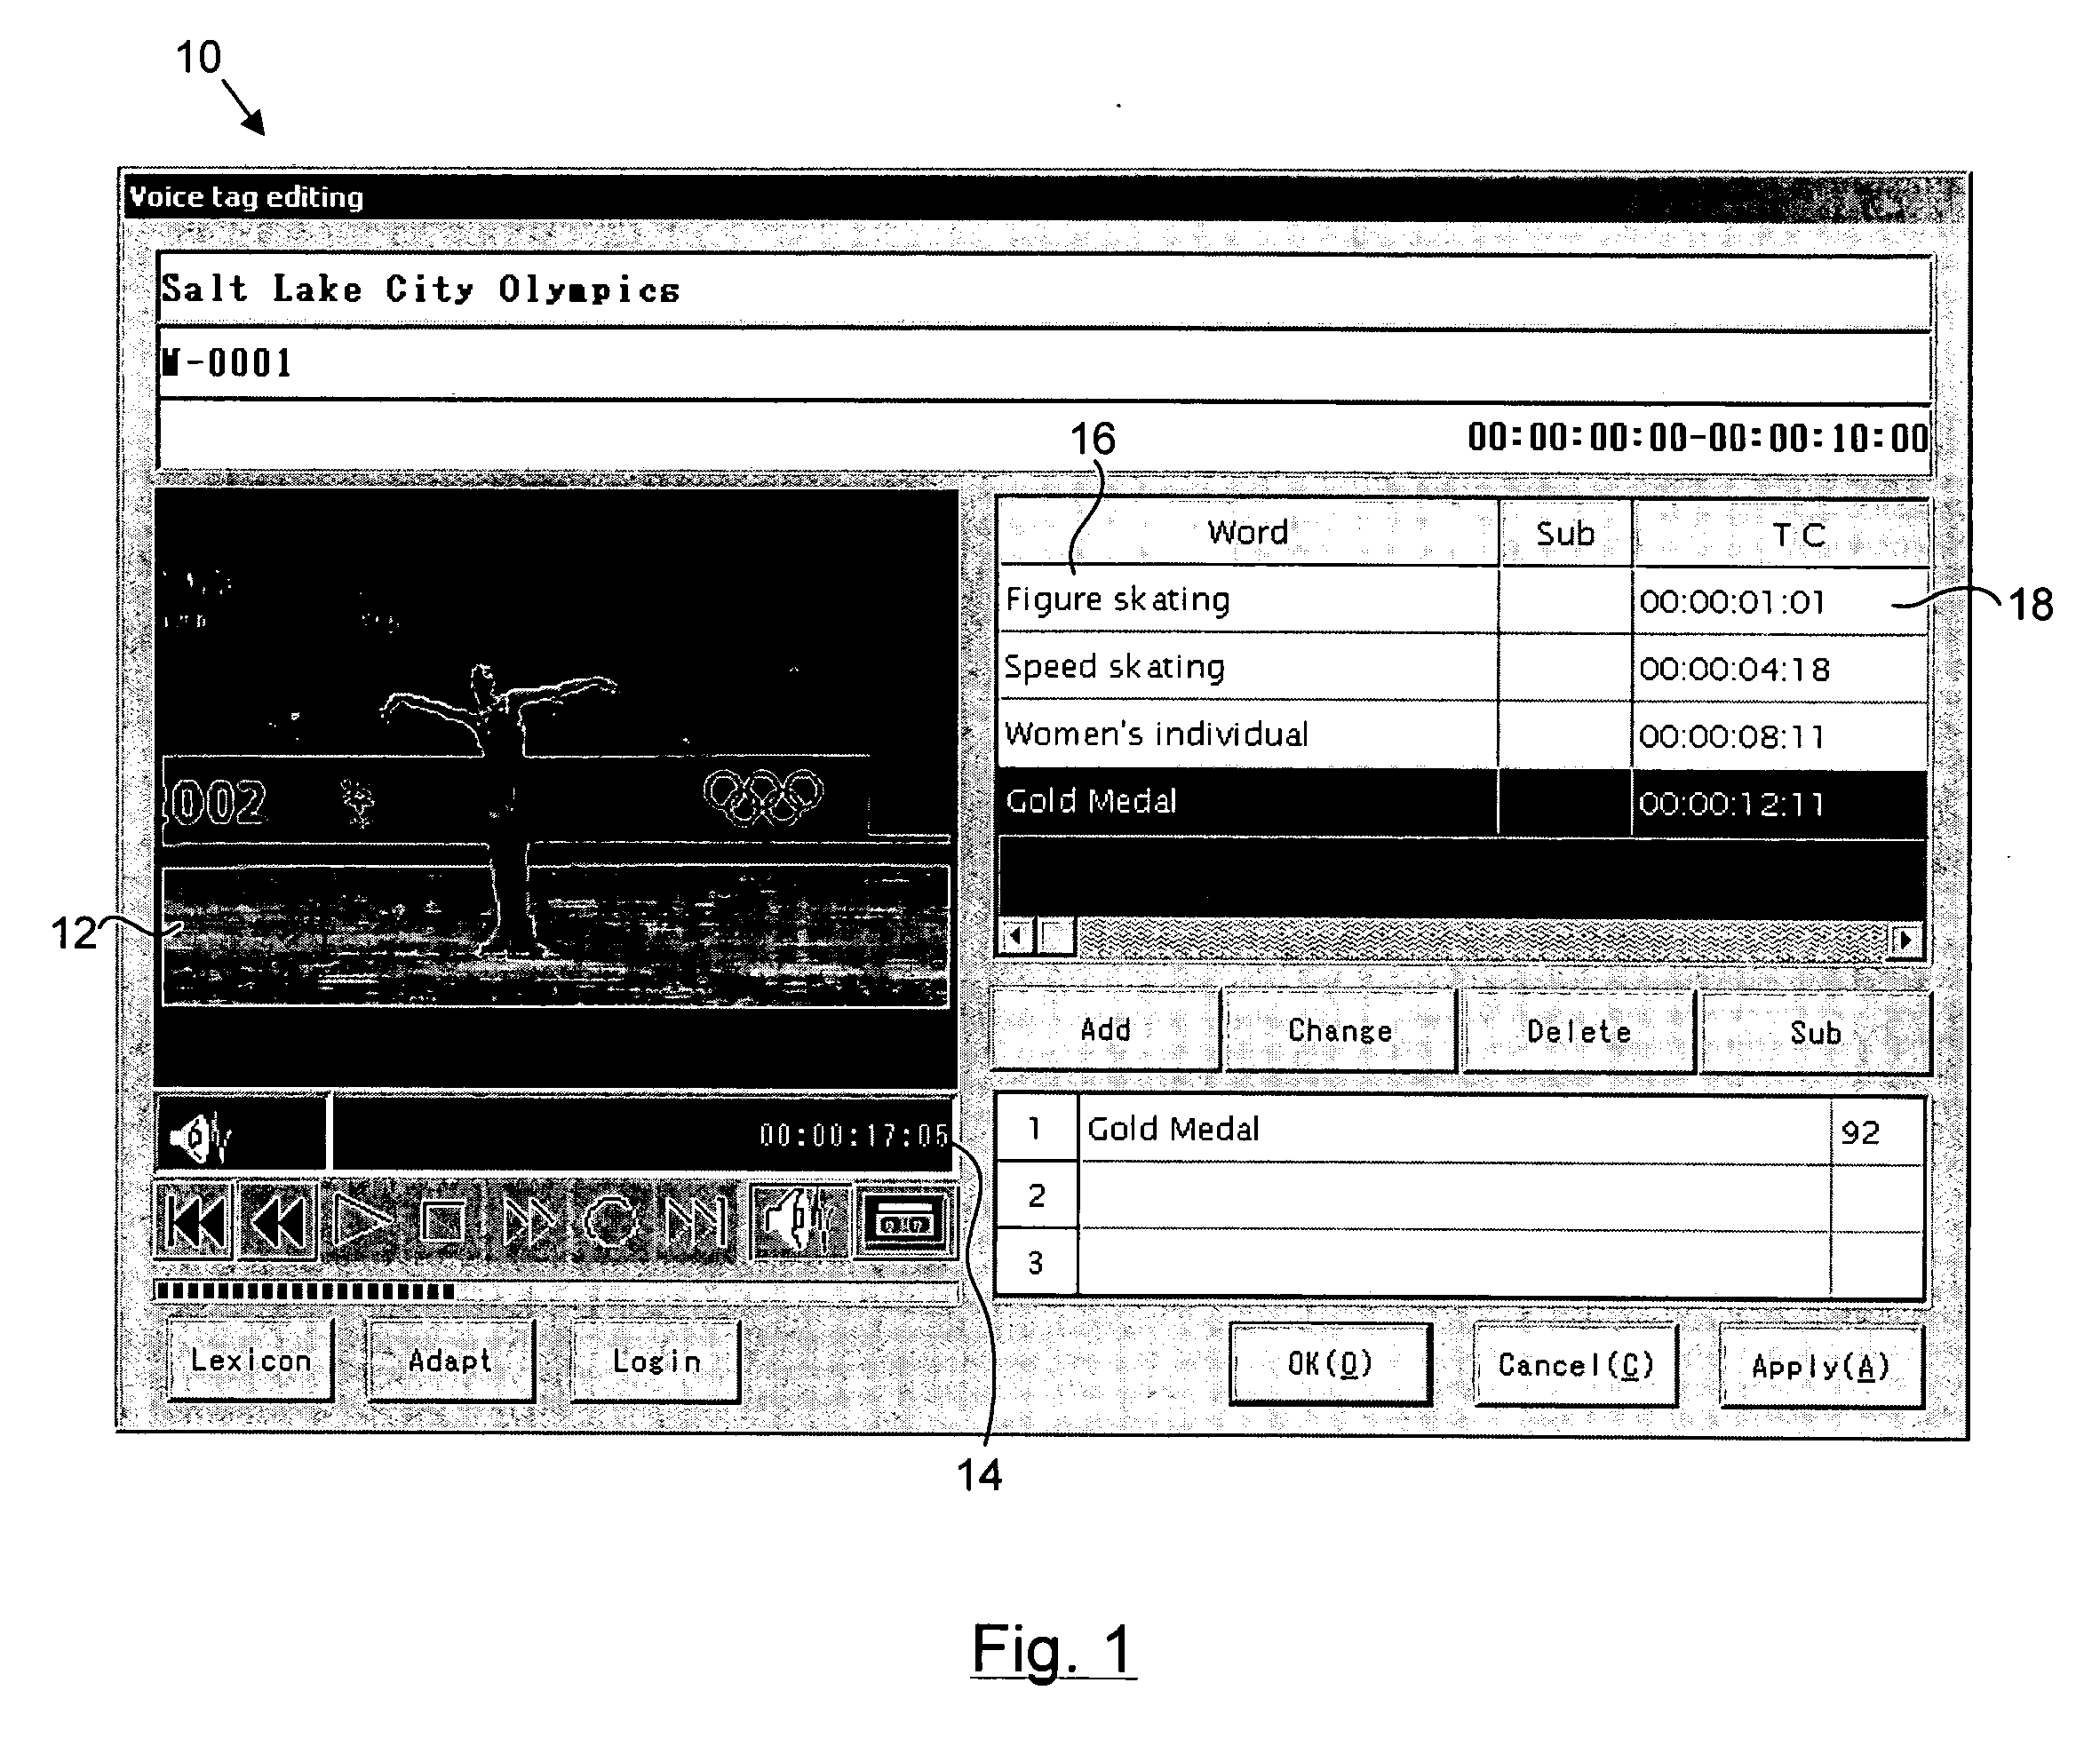 Apparatus and method for voice-tagging lexicon